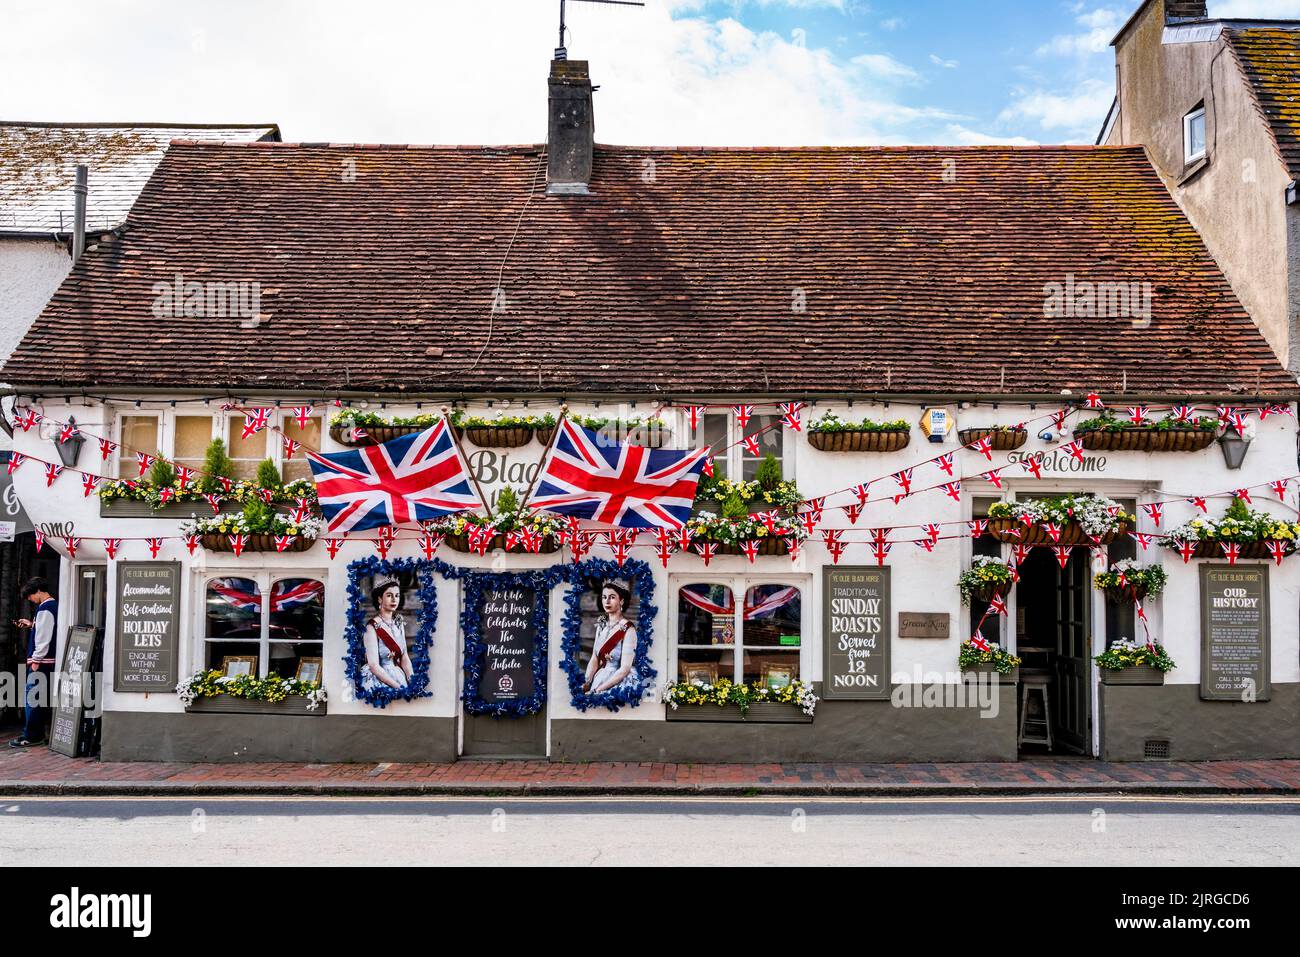 Flags and Portraits Of The Queen Adorn The Front Of The Black Horse Pub During The Queen's Platinum Jubilee Celebrations, Rottingdean, Sussex, UK. Stock Photo